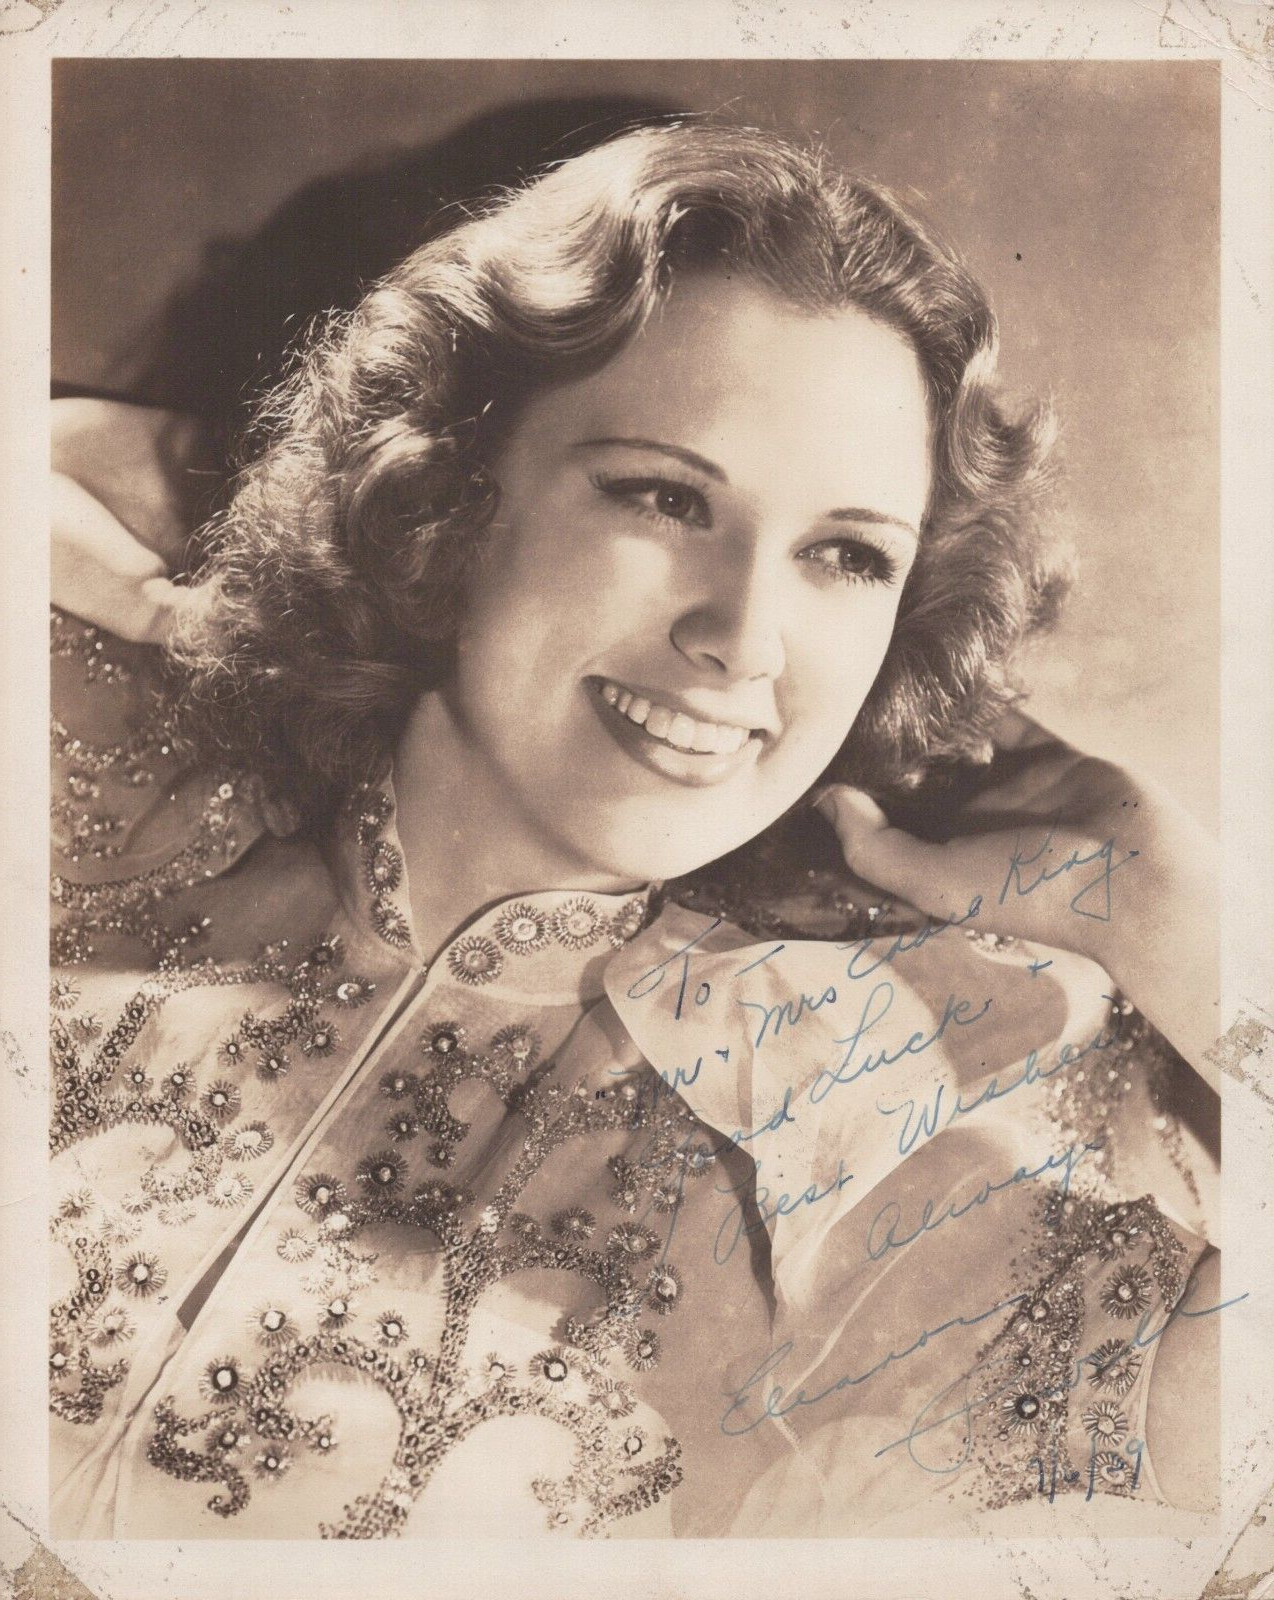 HOLLYWOOD ELEANOR POWELL STUNNING PORTRAIT 1930s SIGNED AUTOGRAPH ORIG Photo C27